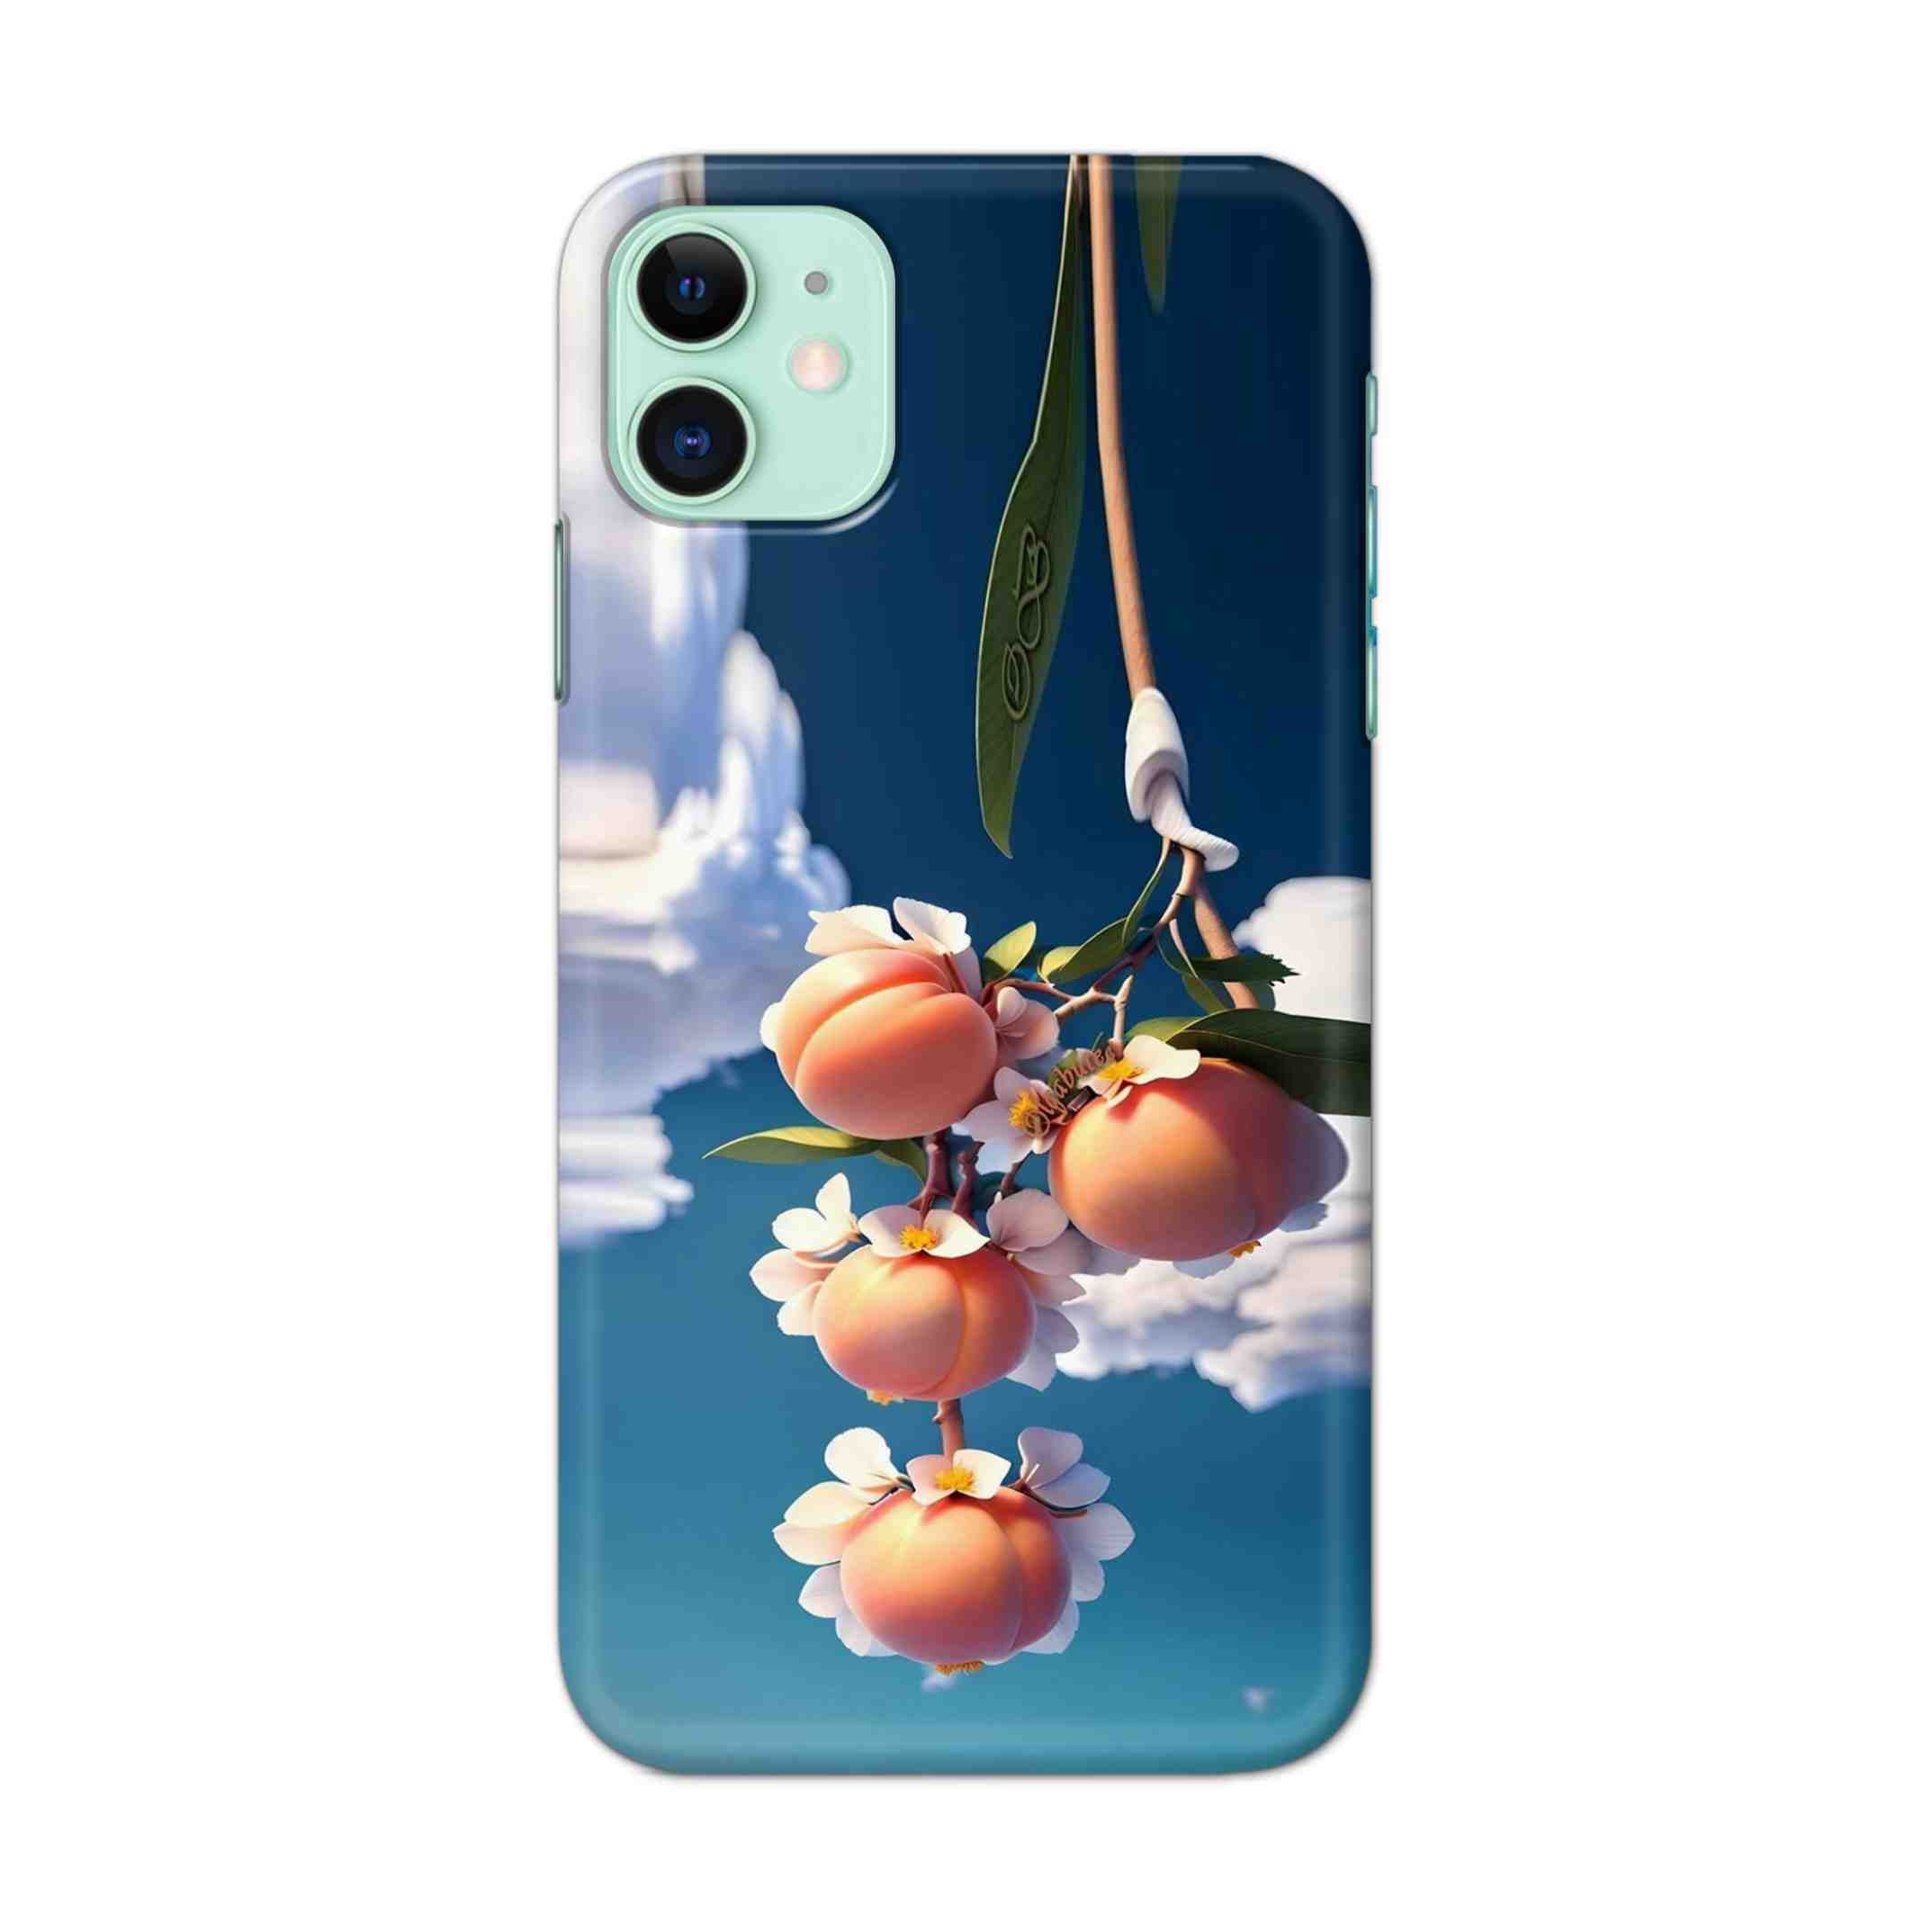 Buy Fruit Hard Back Mobile Phone Case/Cover For iPhone 11 Online